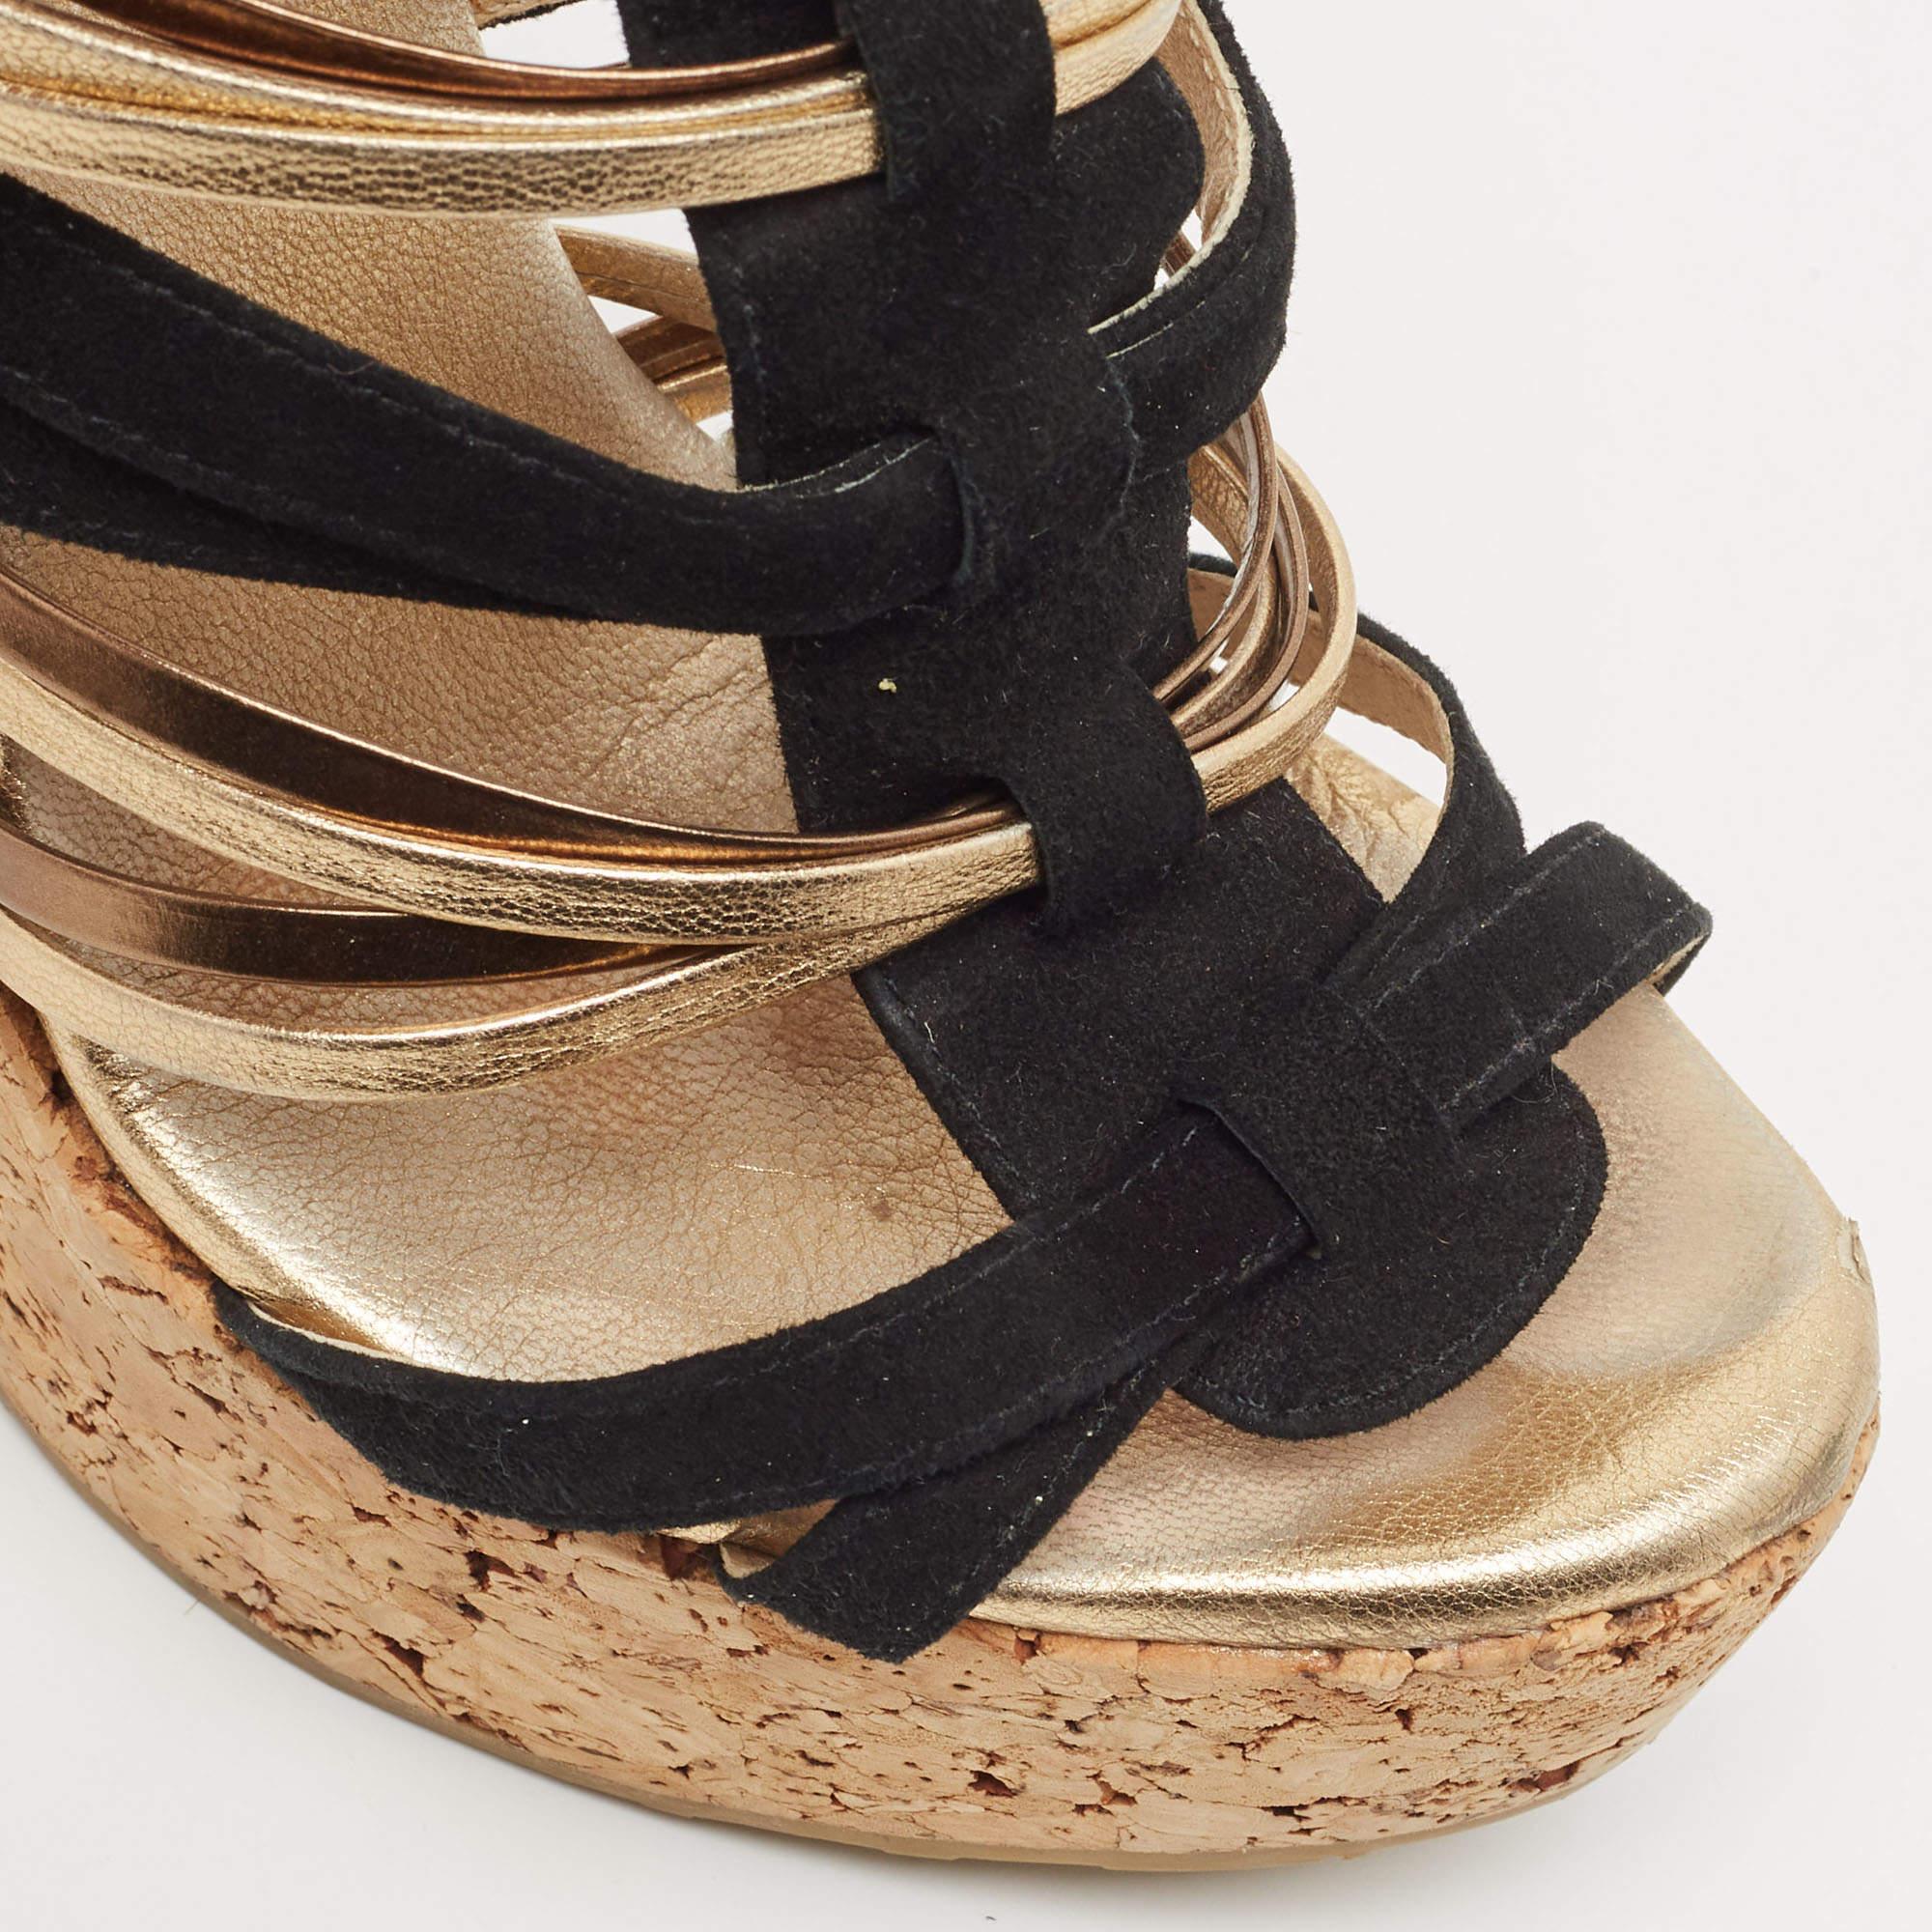 Jimmy Choo Black/Gold Suede and Leather Wedge Sandals Size 37 For Sale 1